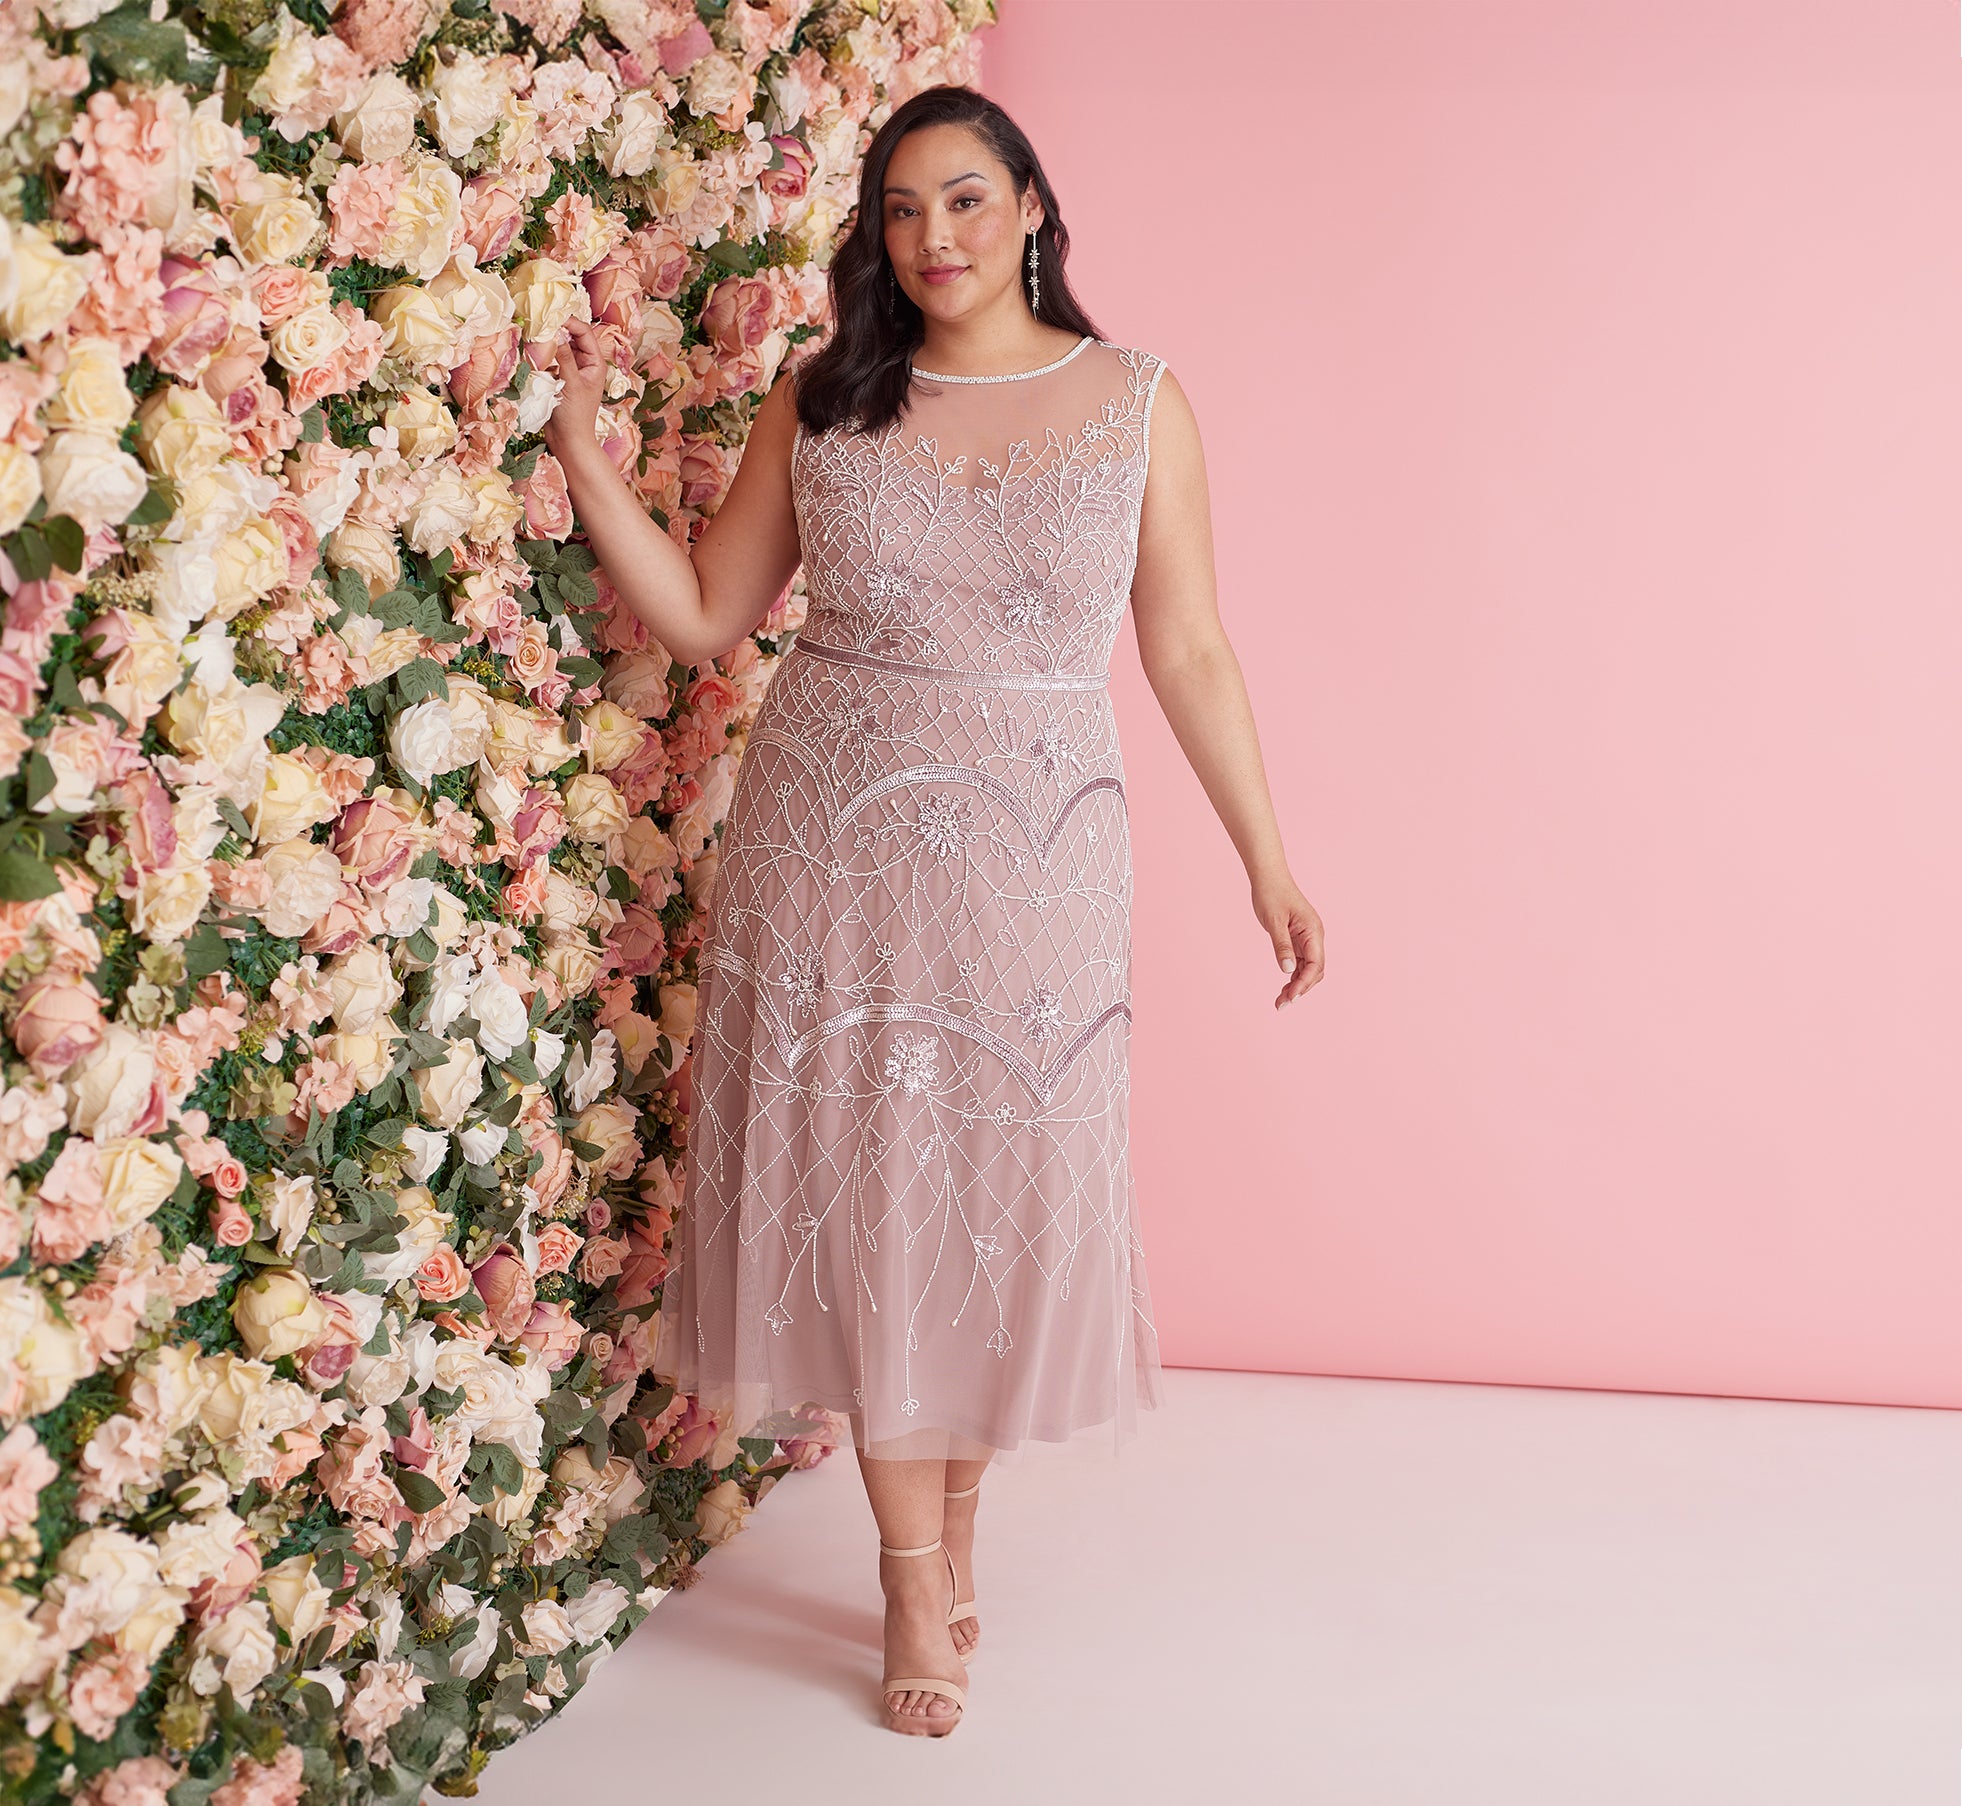 Plus Size Beaded Ankle-Length Dress With Sheer Neckline In Dusted